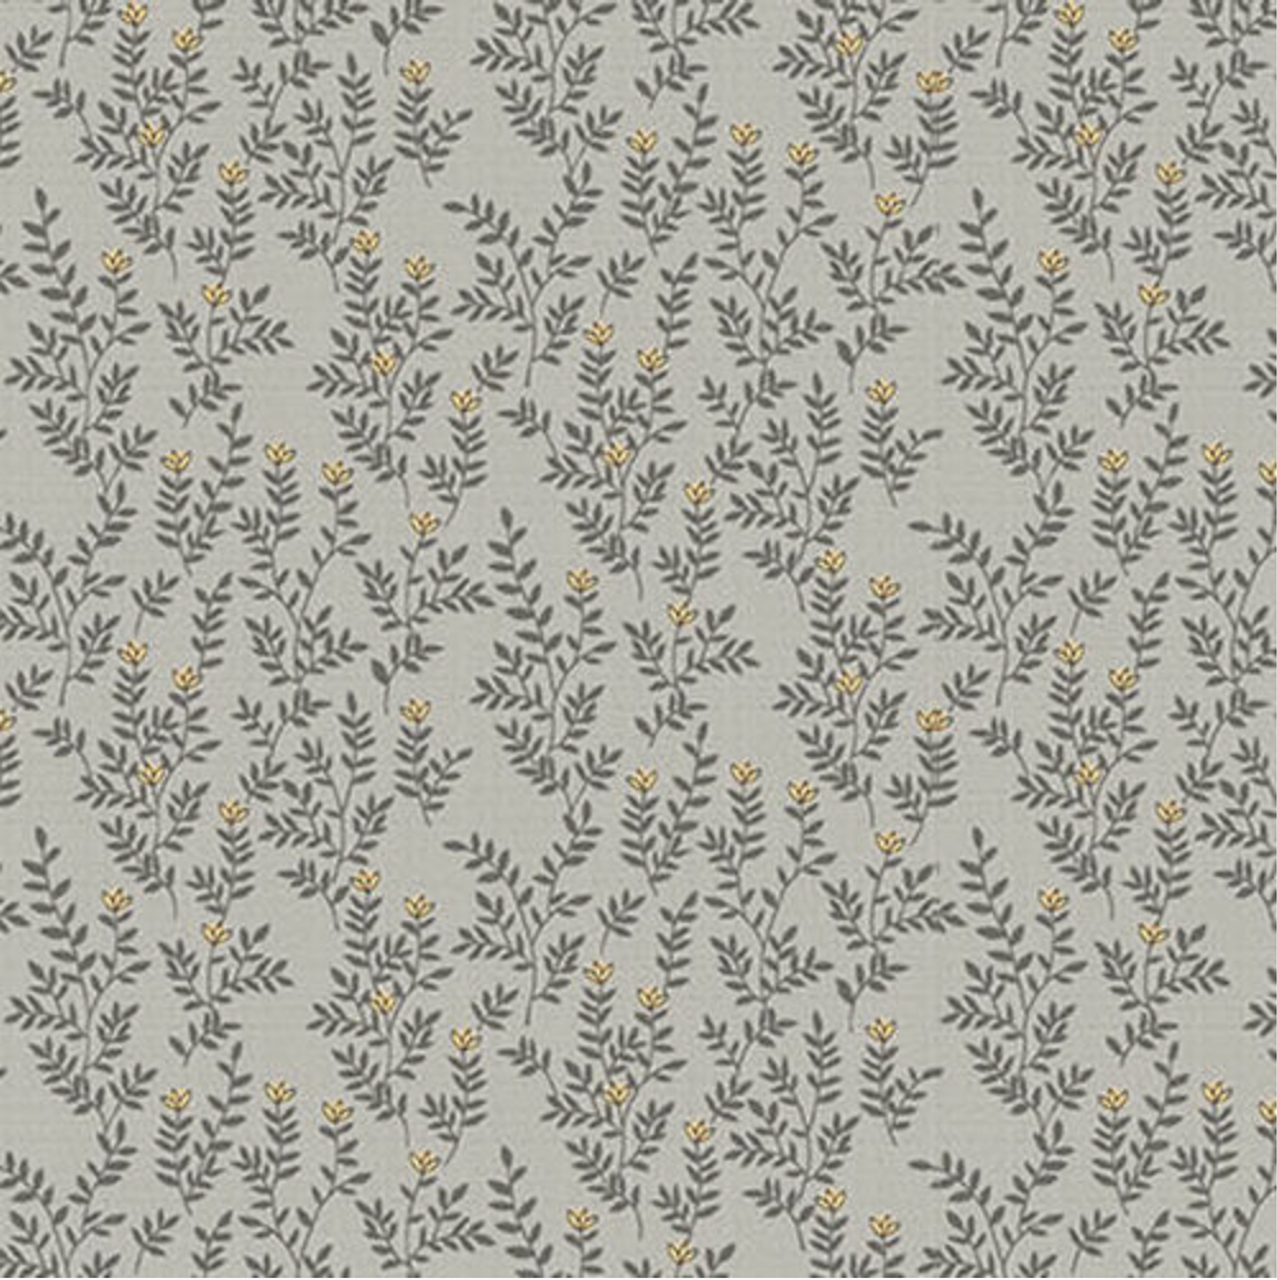 Henry Glass Bloomin' Poppies Tiny Flowers Gray Fabric By The Yard